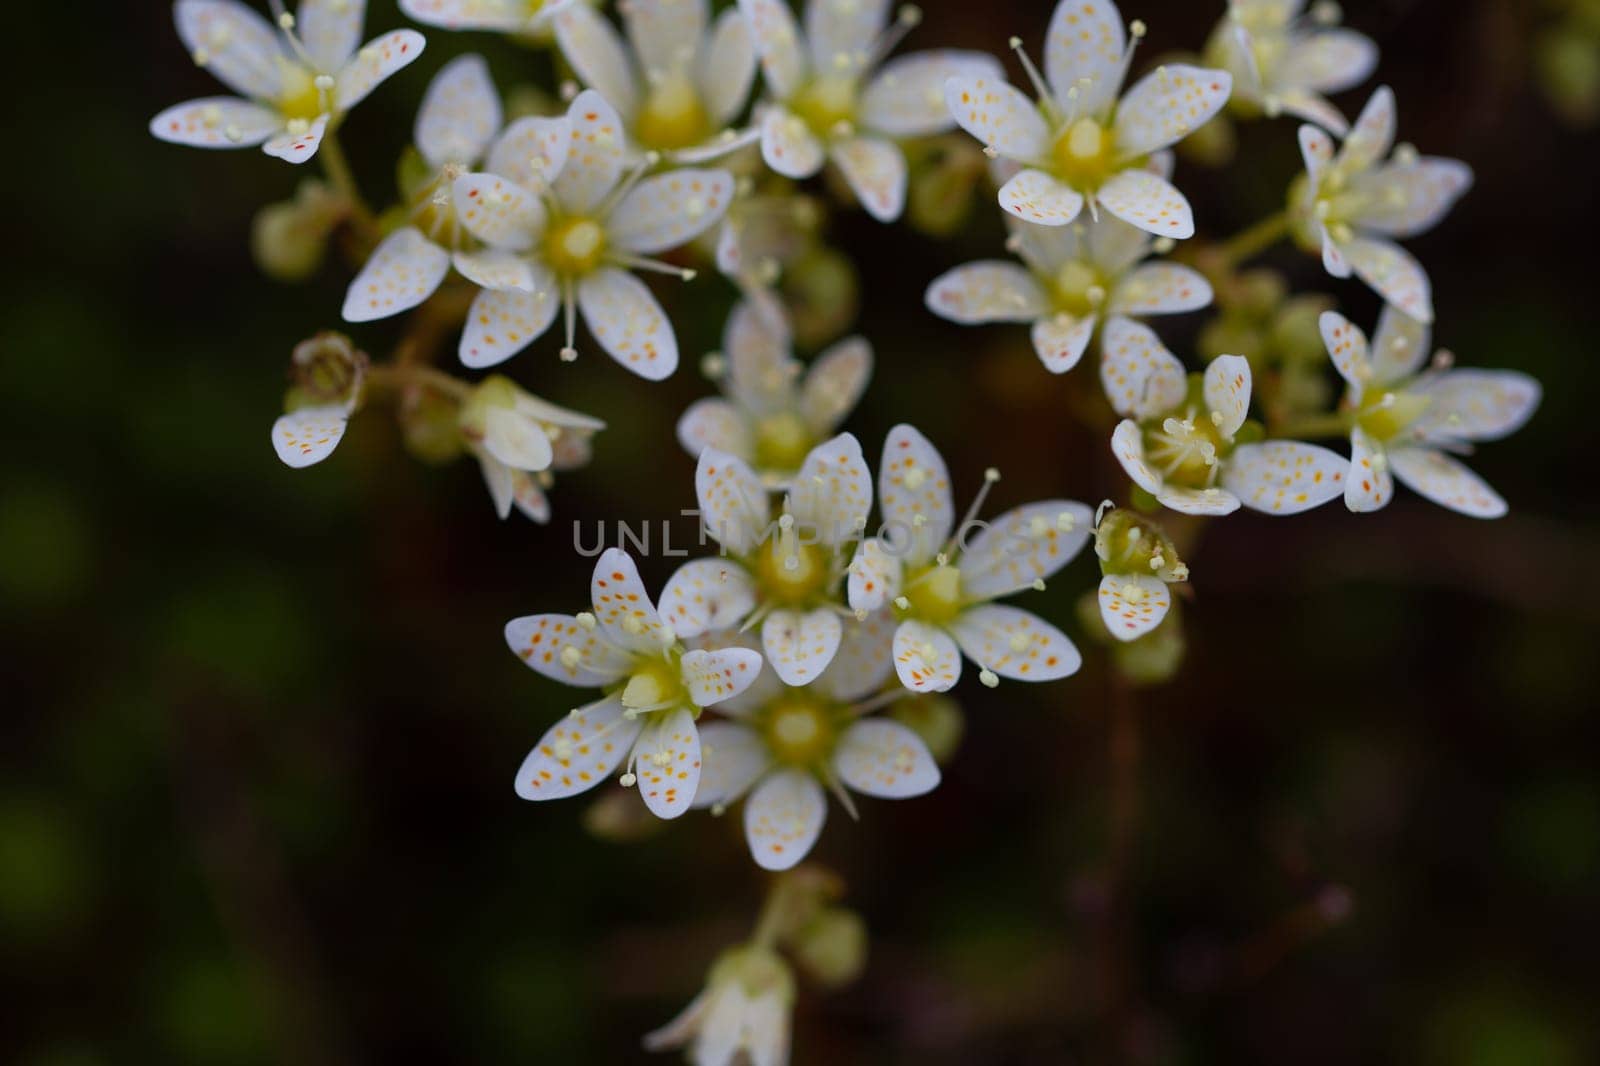 Closeup of prickly saxifrage flowers growing in large bunches by Granchinho